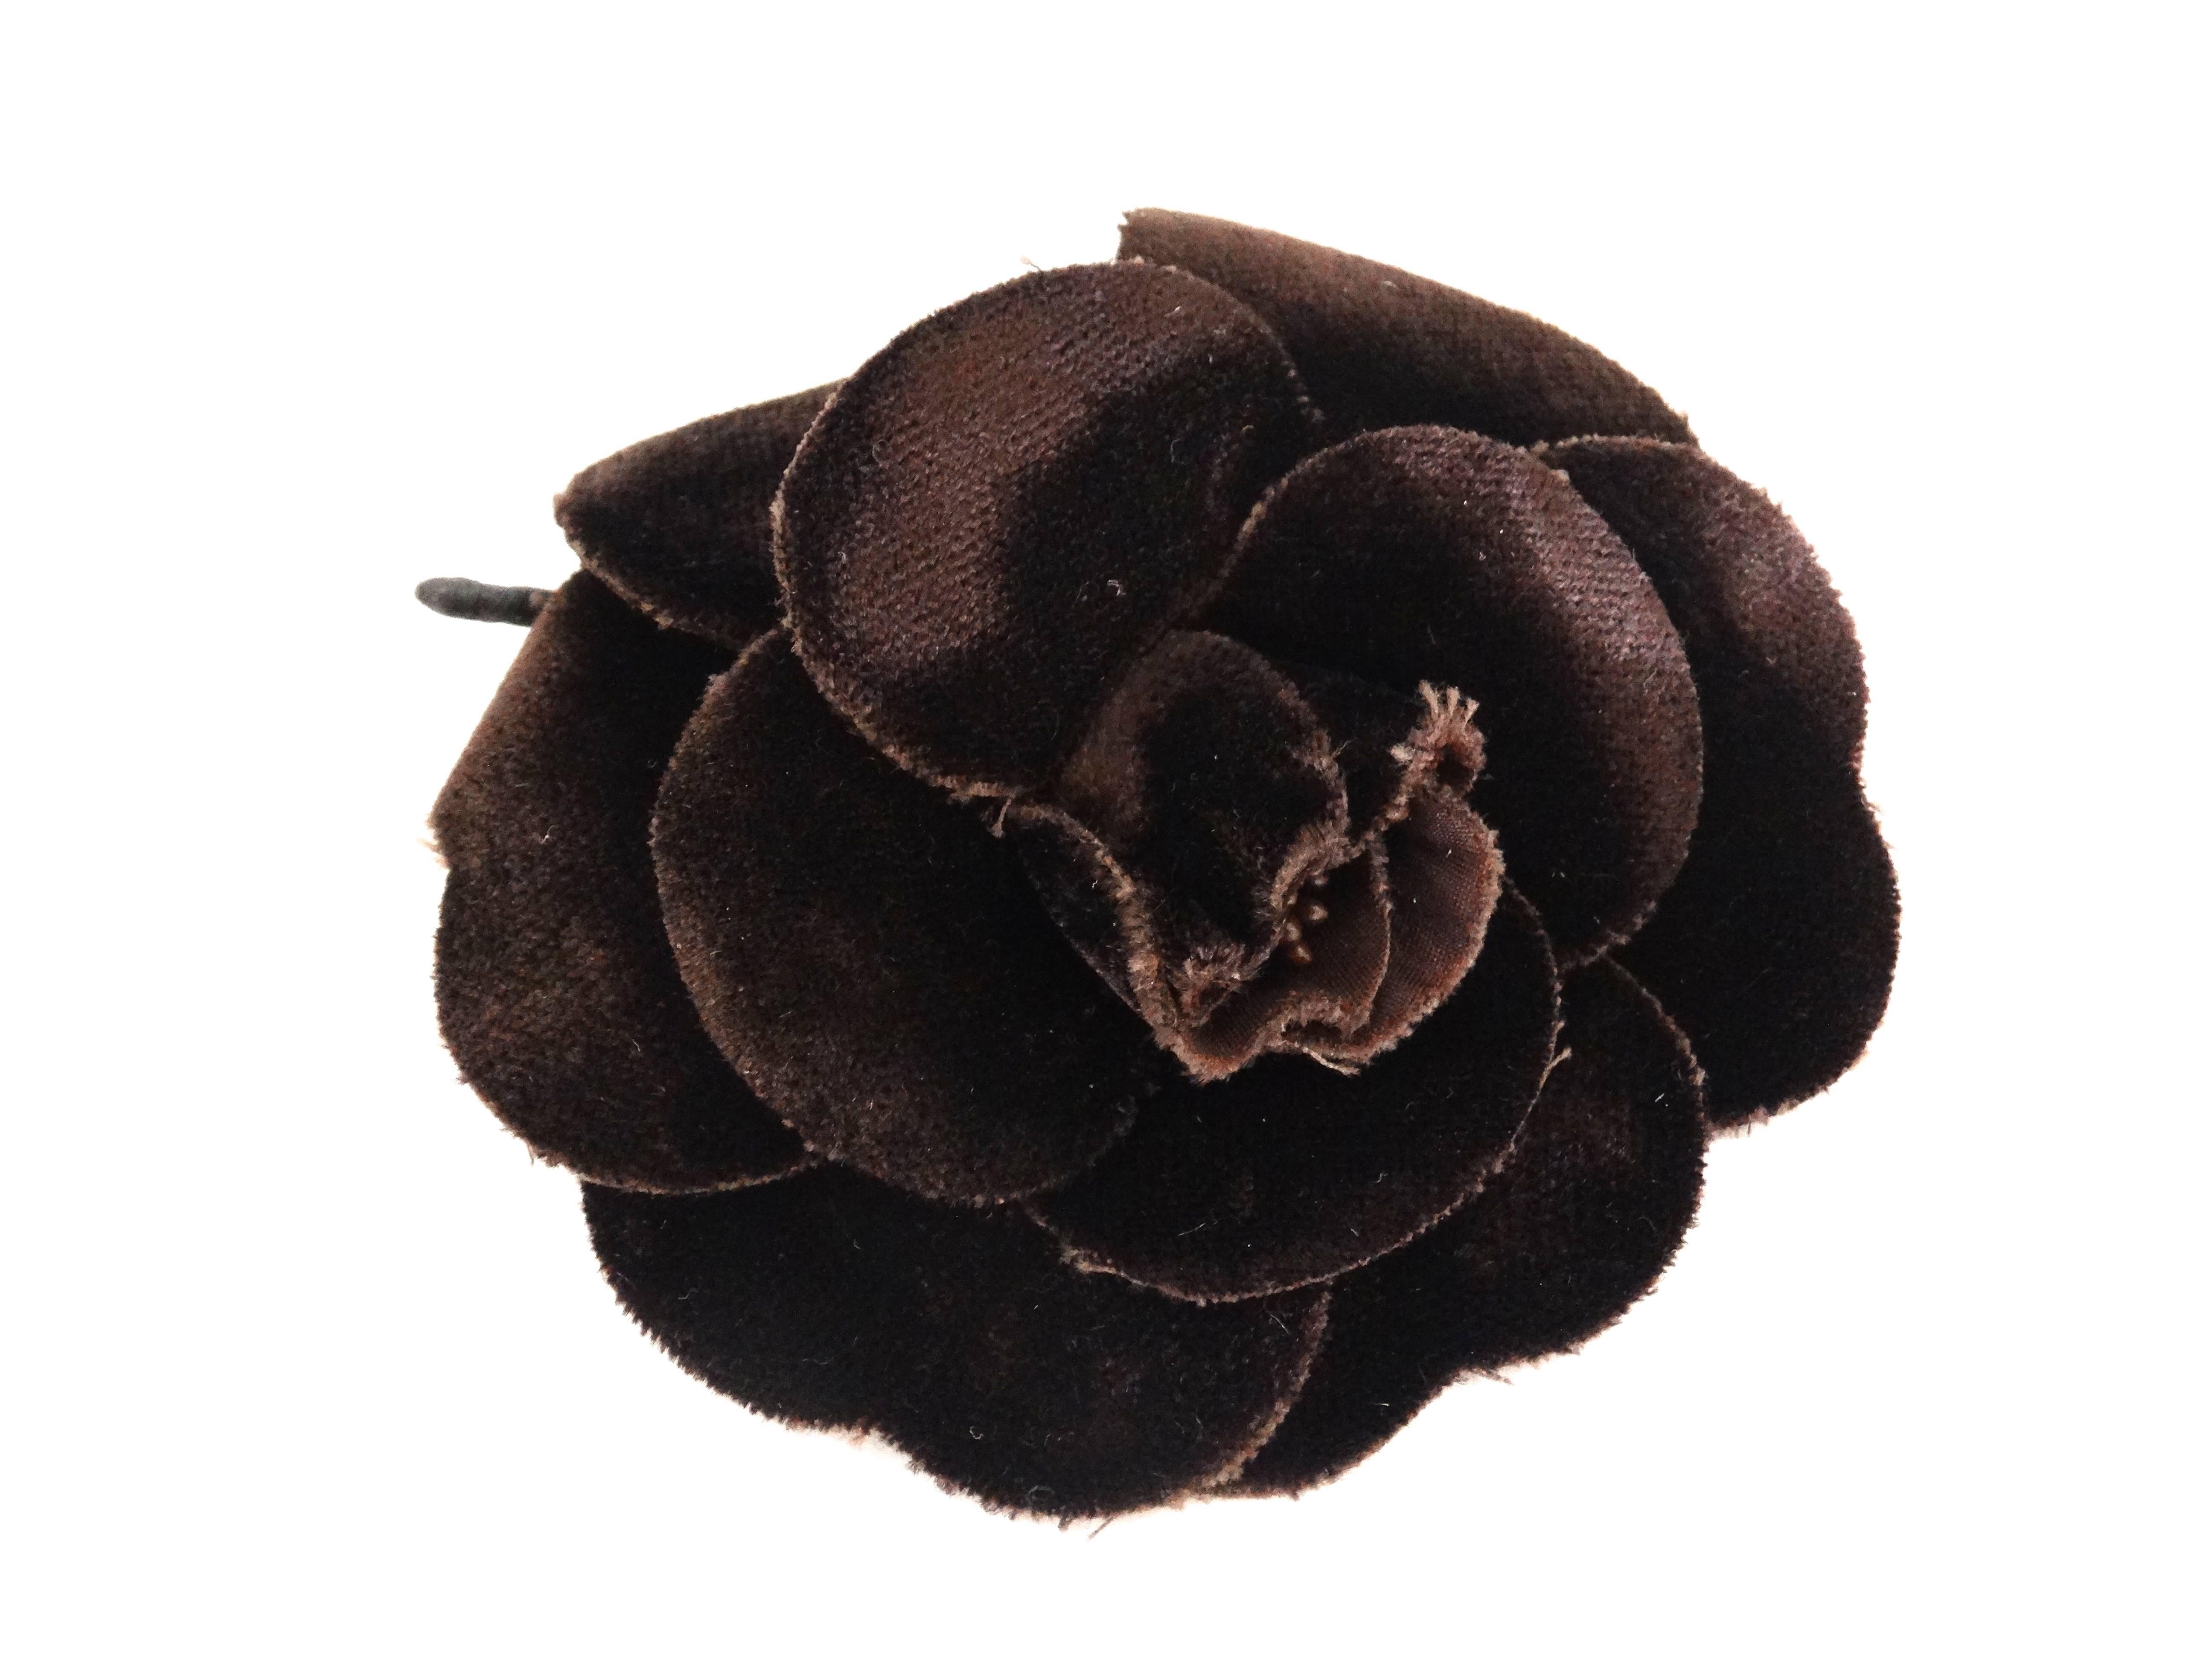 This classic 1980's Camellia Chanel brooch is made of chocolate velveteen, petals have a raw edge cut. Pin closure at back, Chanel signature plate attached. 

Measurements: 
3.5 inches by 3.5 inches in diameter 